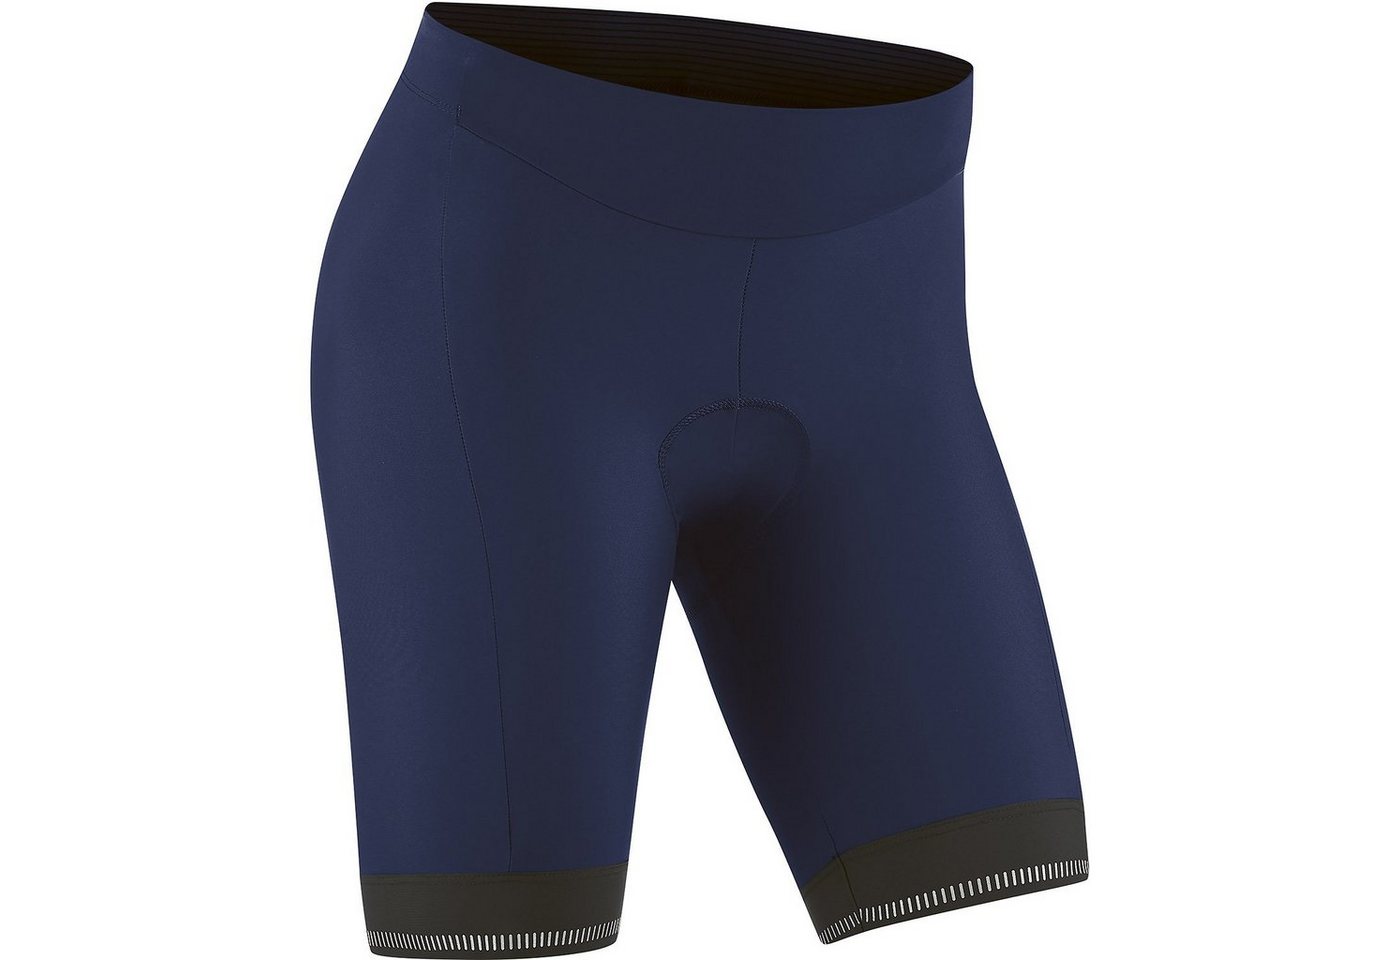 Gonso 2-in-1-Shorts Shorts Bike Sitivo Red von Gonso